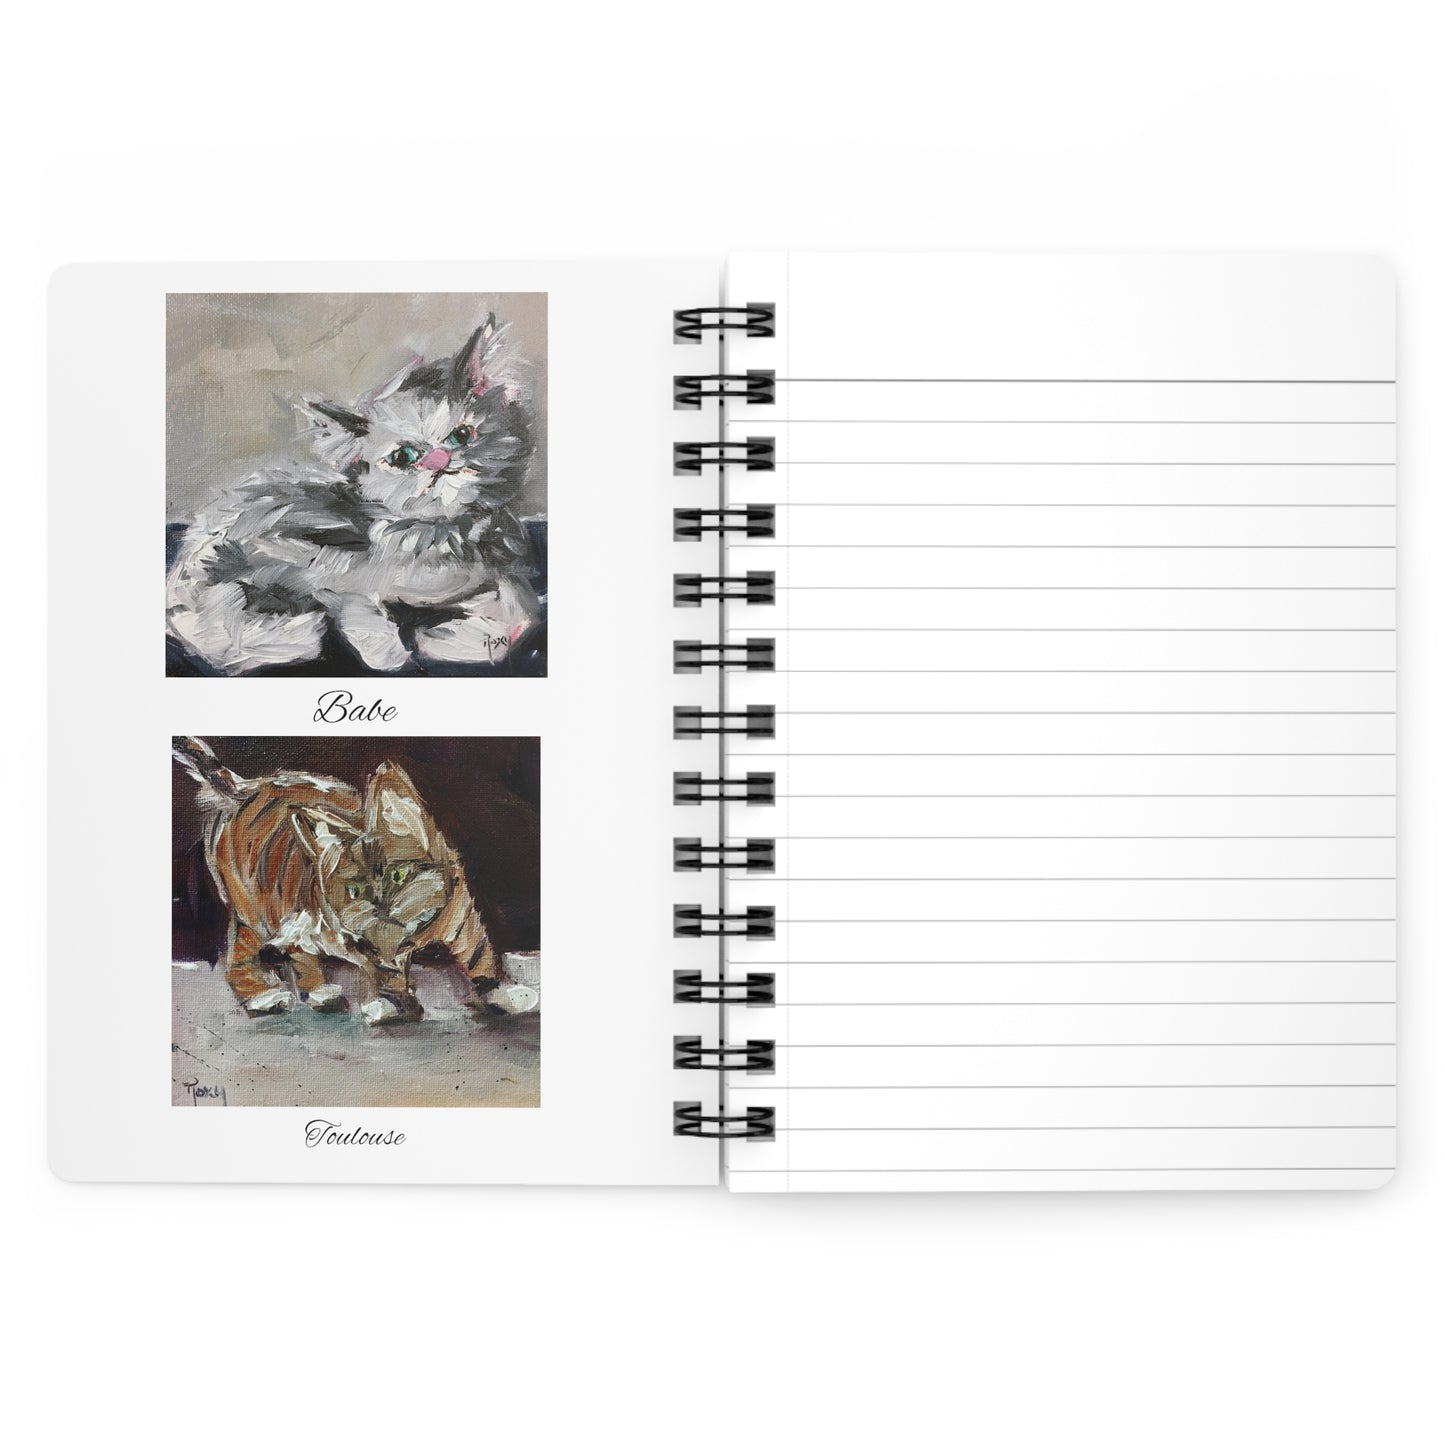 Pretty Kitties -Five Adorable Cat Paintings- Spiral Bound Journal